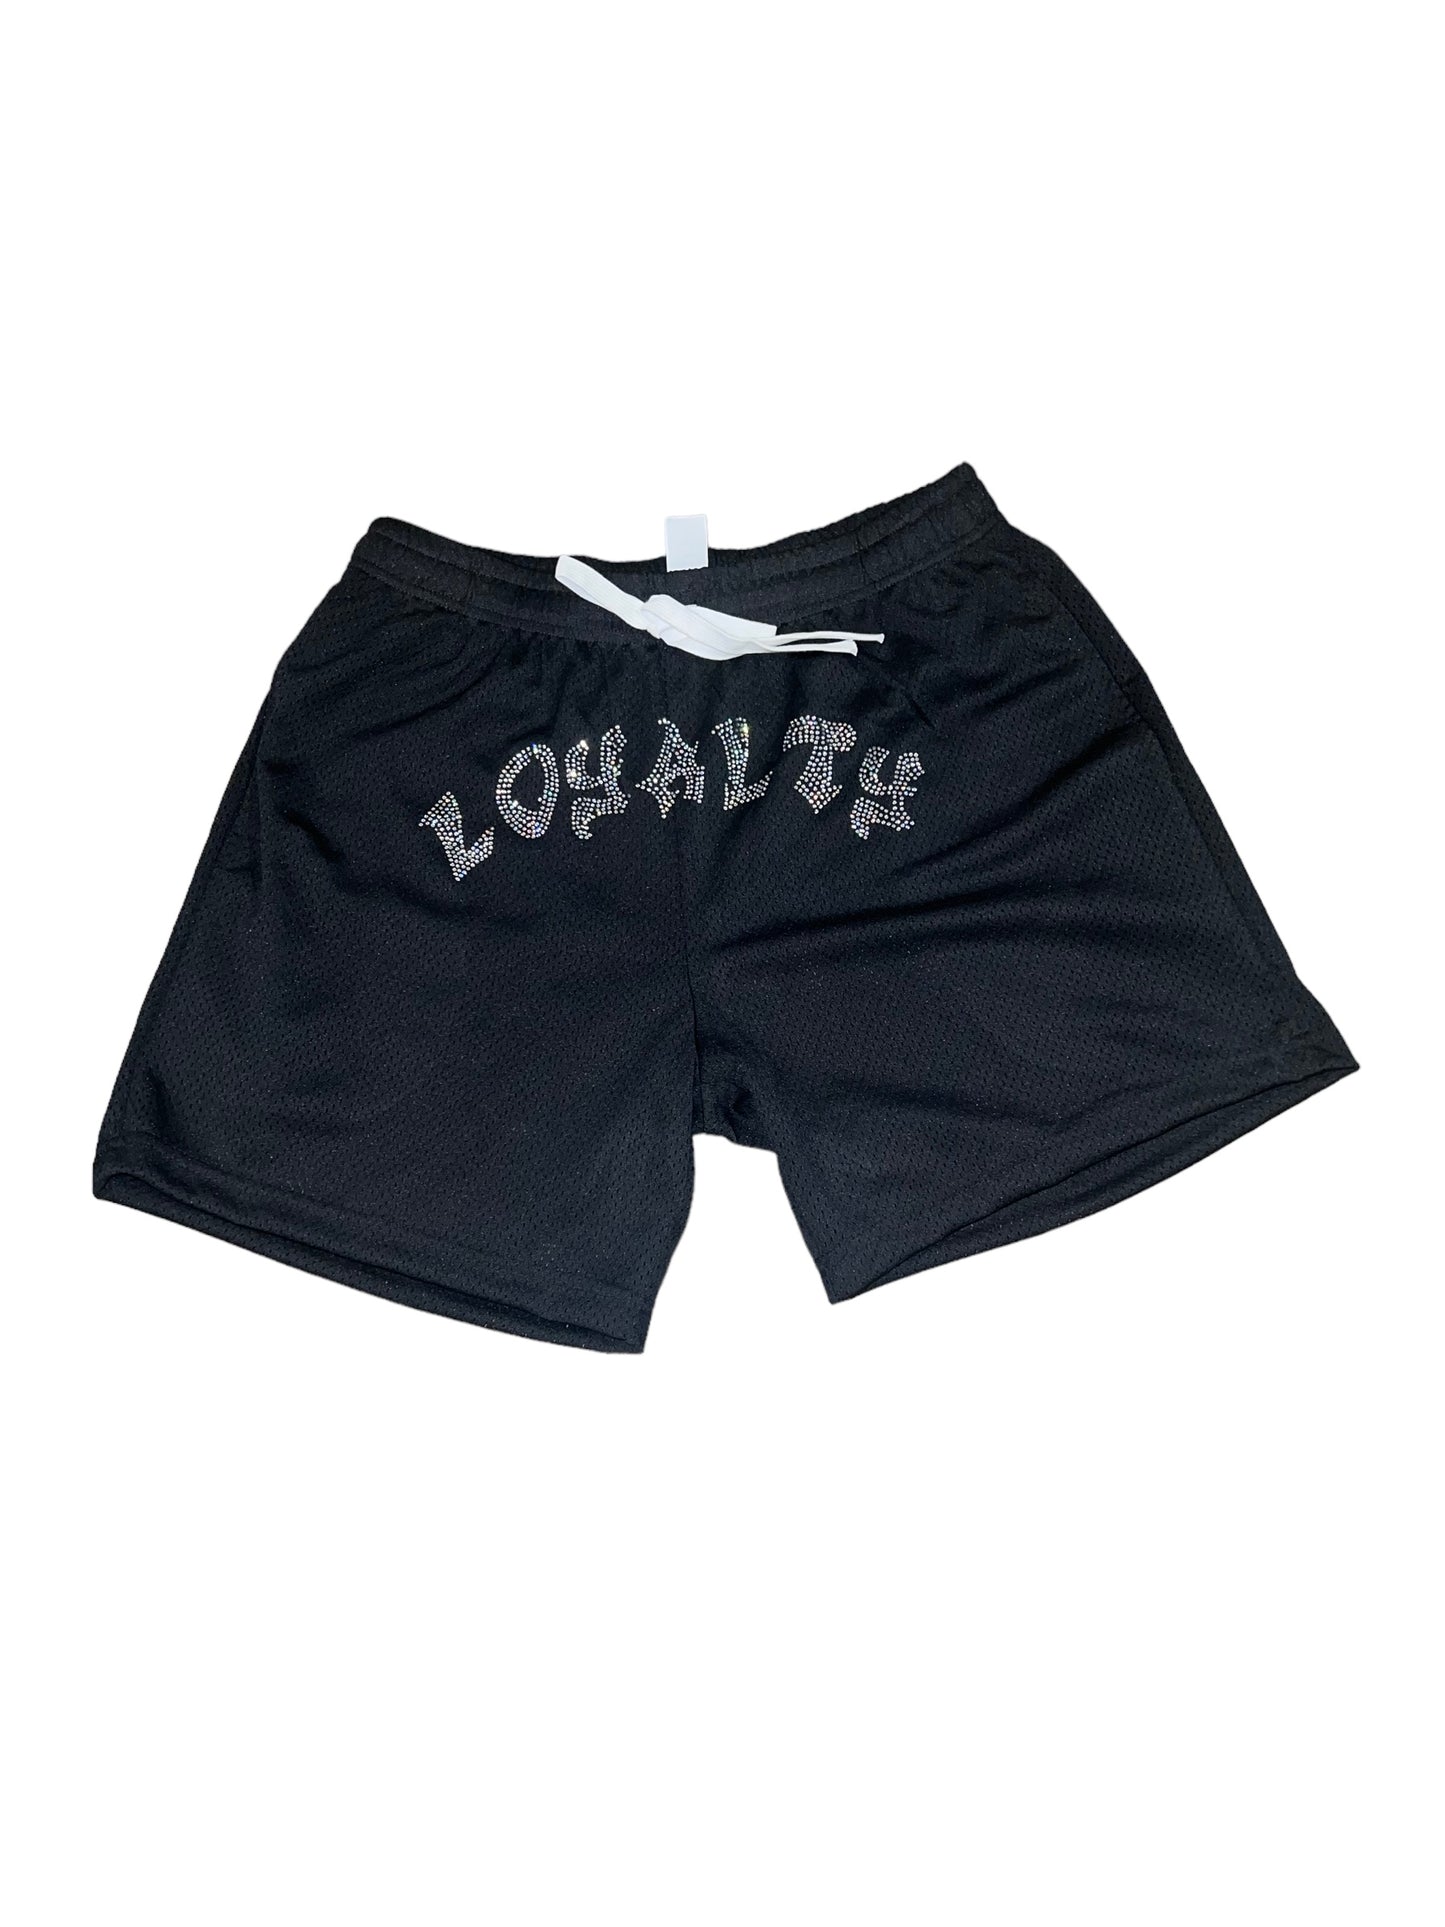 Iced Out Loyalty shorts